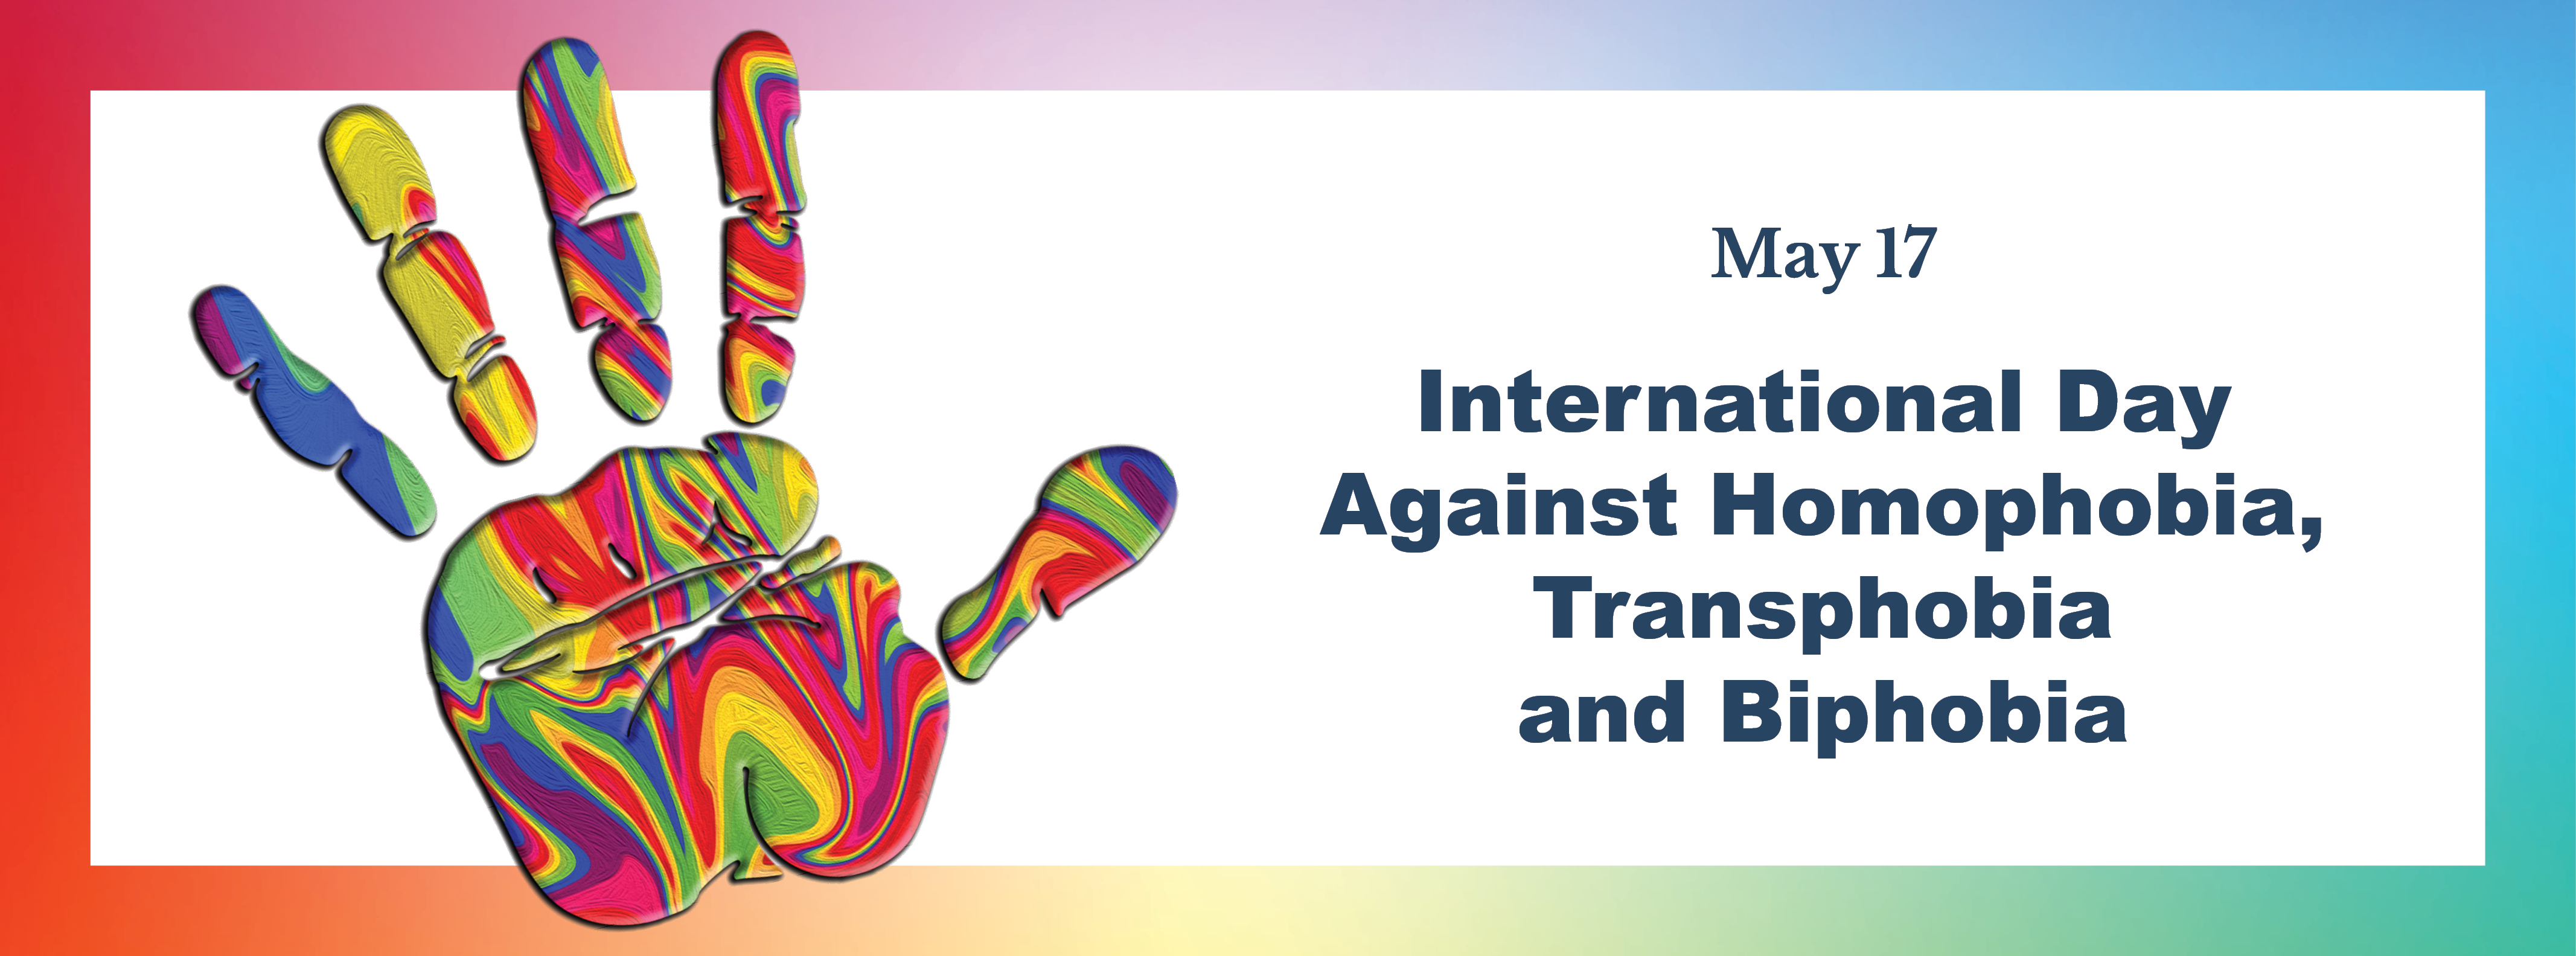 May 17 - International Day Against Homophobia, Transphobia and Biphobia